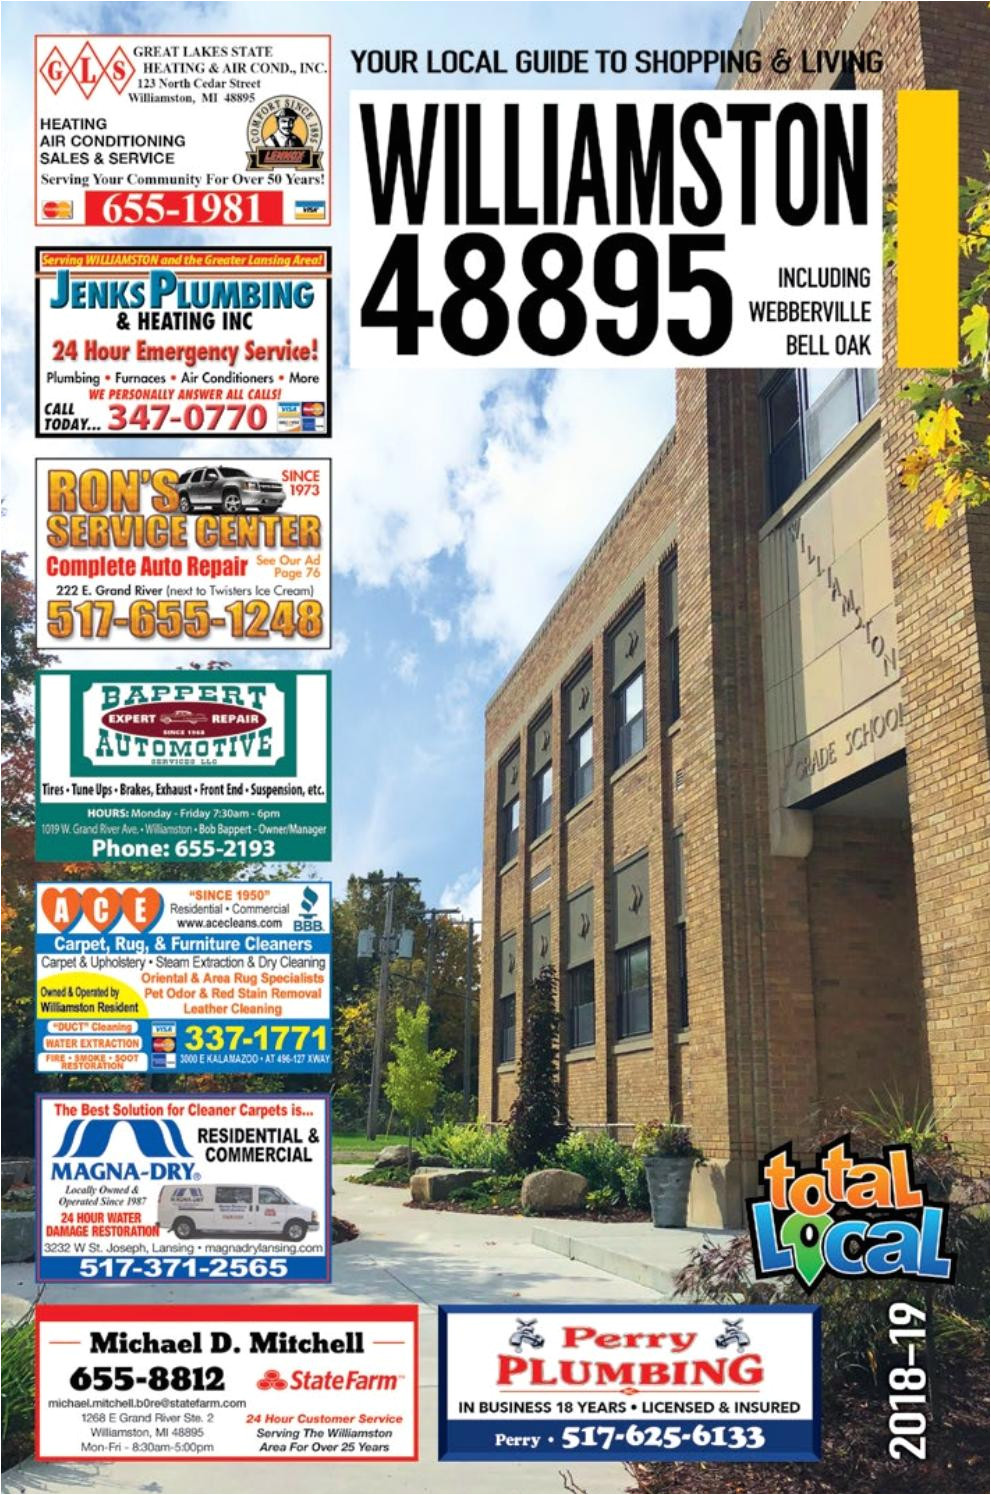 total local 2018 19 williamston mi community resource guide by total local issuu